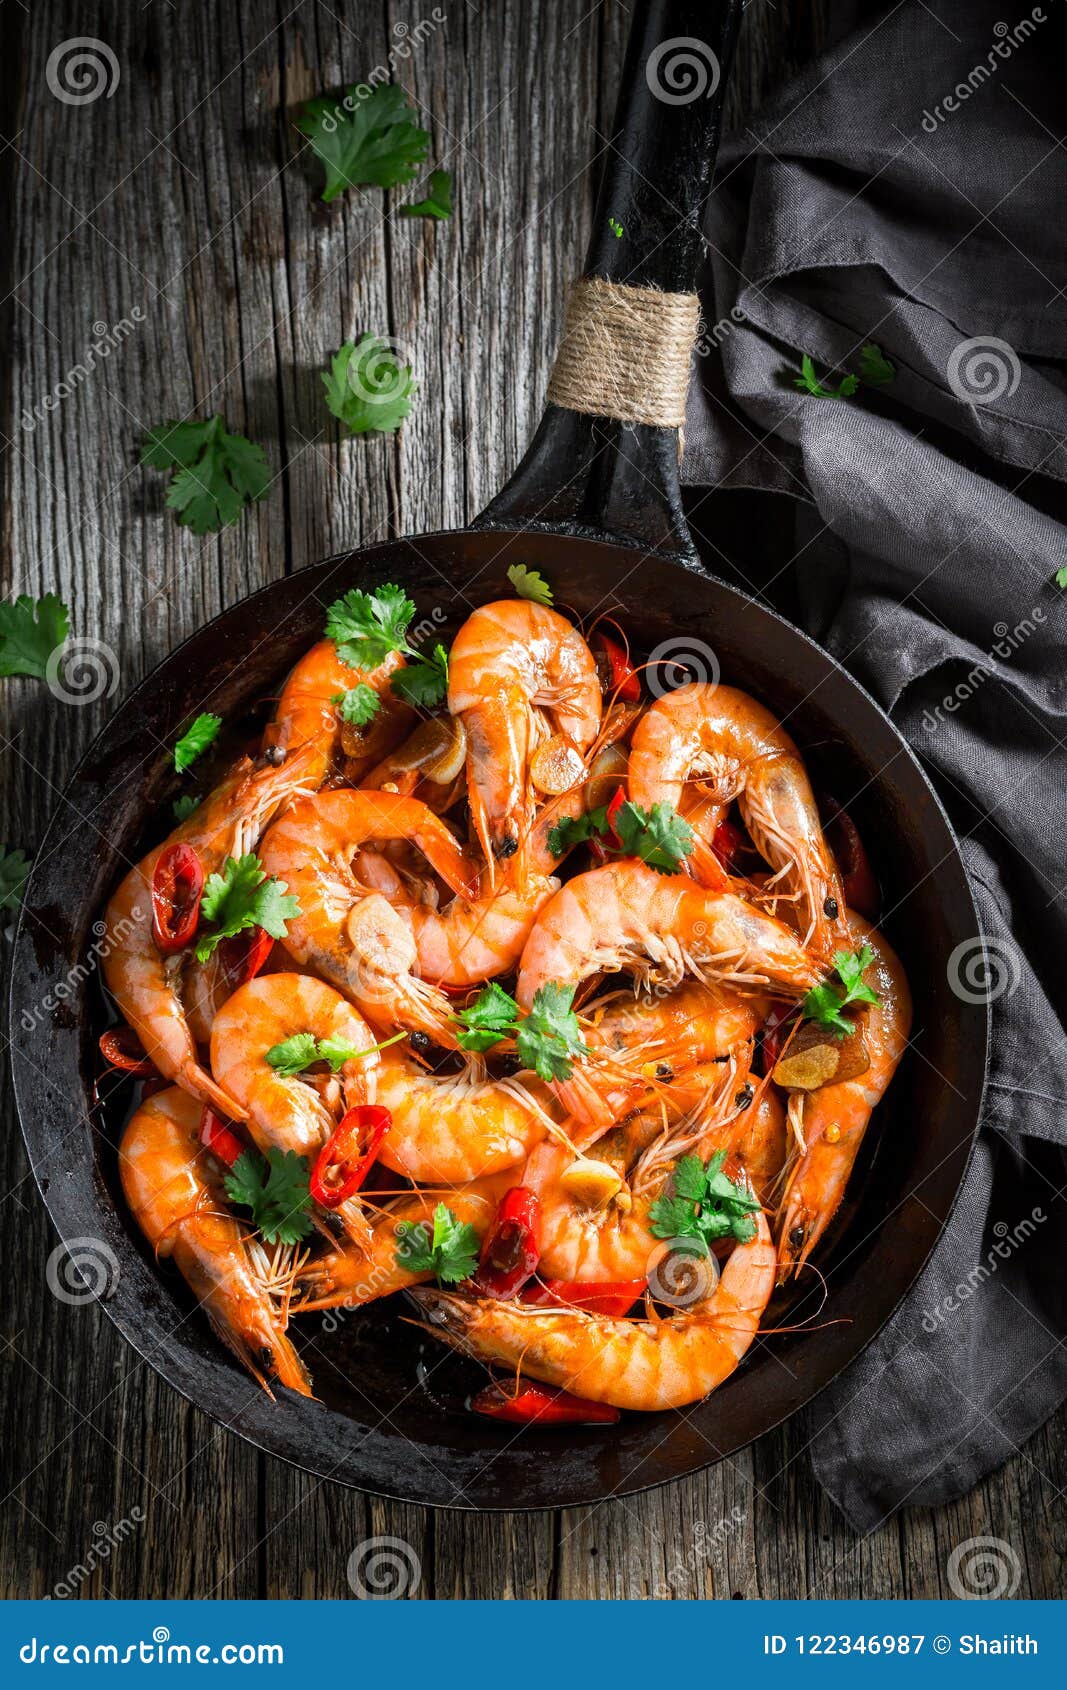 Top View of Shrimps on Pan with Garlic and Peppers Stock Image - Image ...